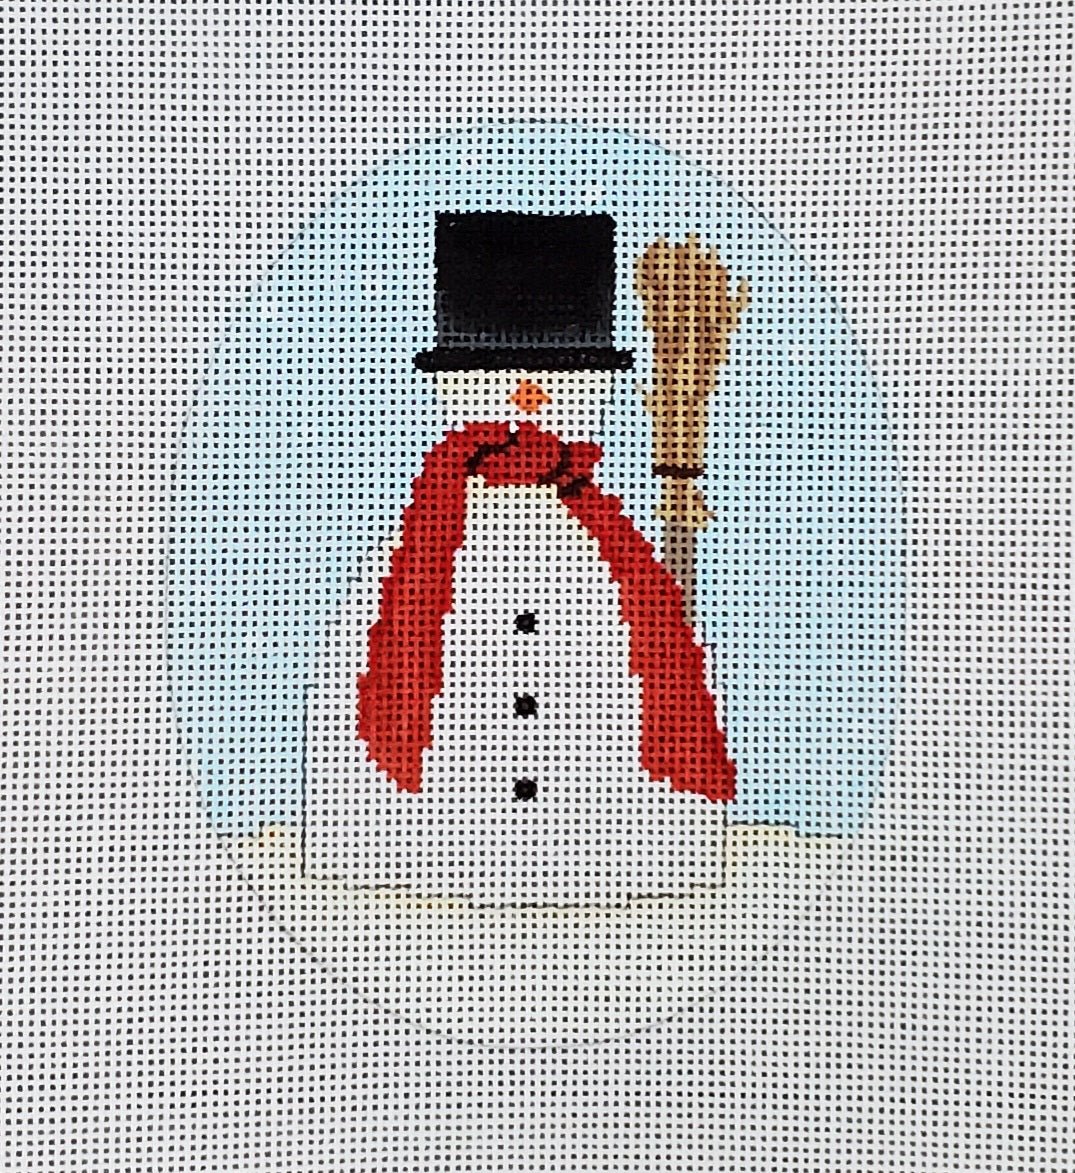 Snowman w/Top Hat - The Flying Needles